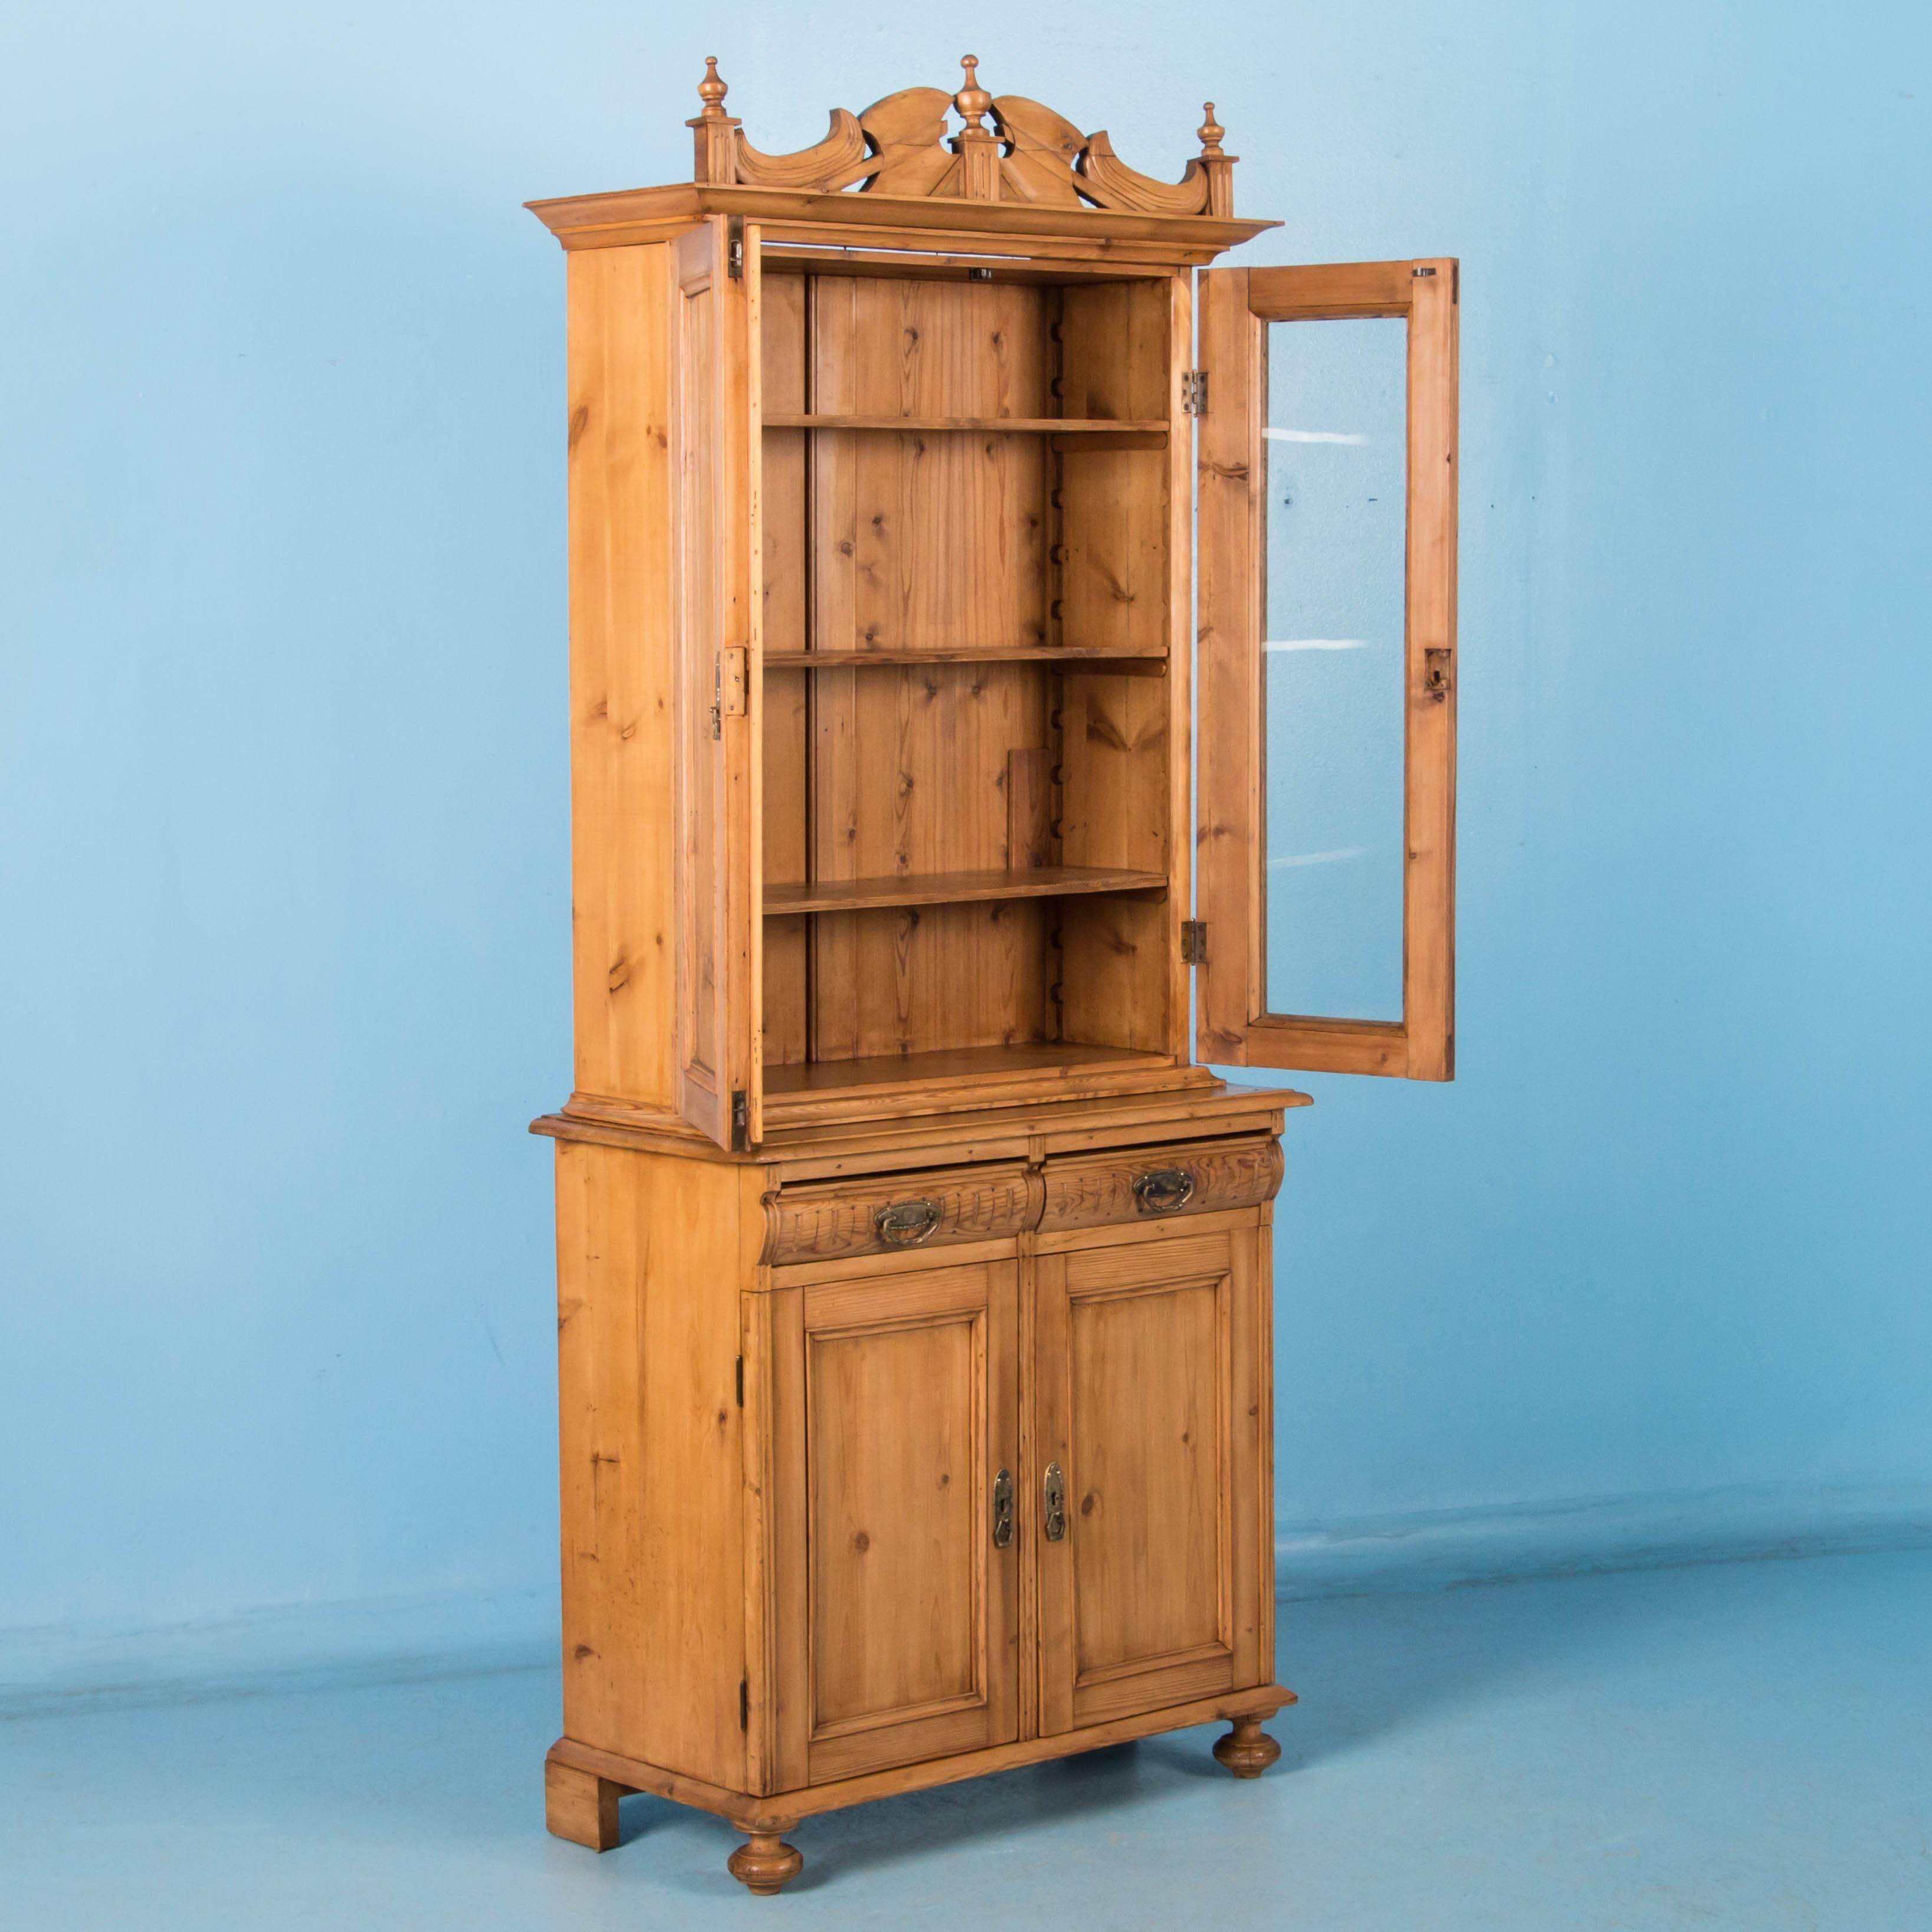 Danish Tall Antique 19th Century Pine Bookcase Cabinet from Denmark